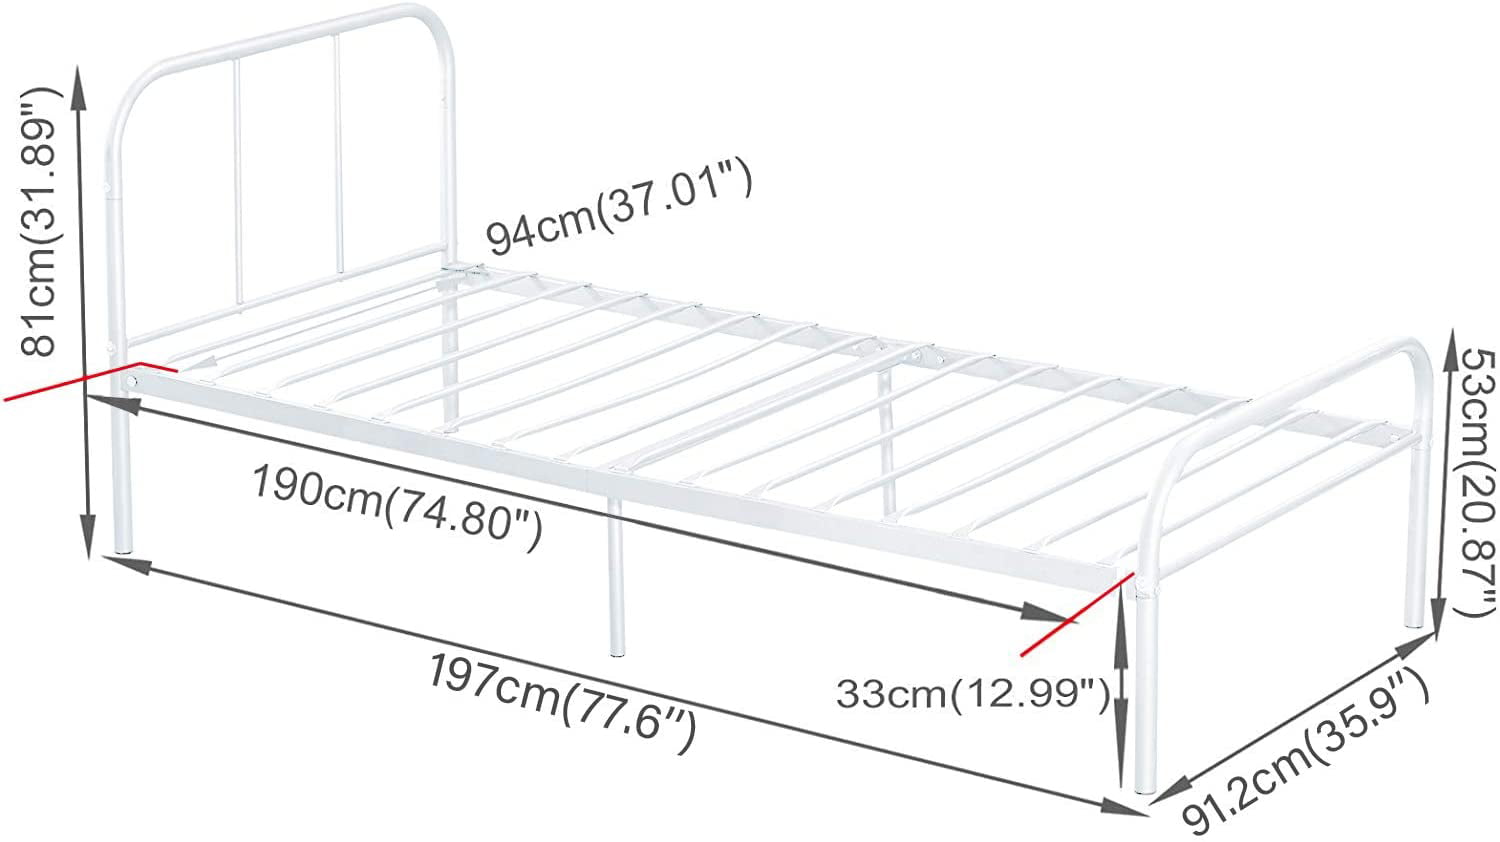 Voilamart Twin Metal Bed Frame with Headboard and Footboard, Single 6 Legs Platform Mattress Foundation for Kids Adult, No Box Springs Need, White